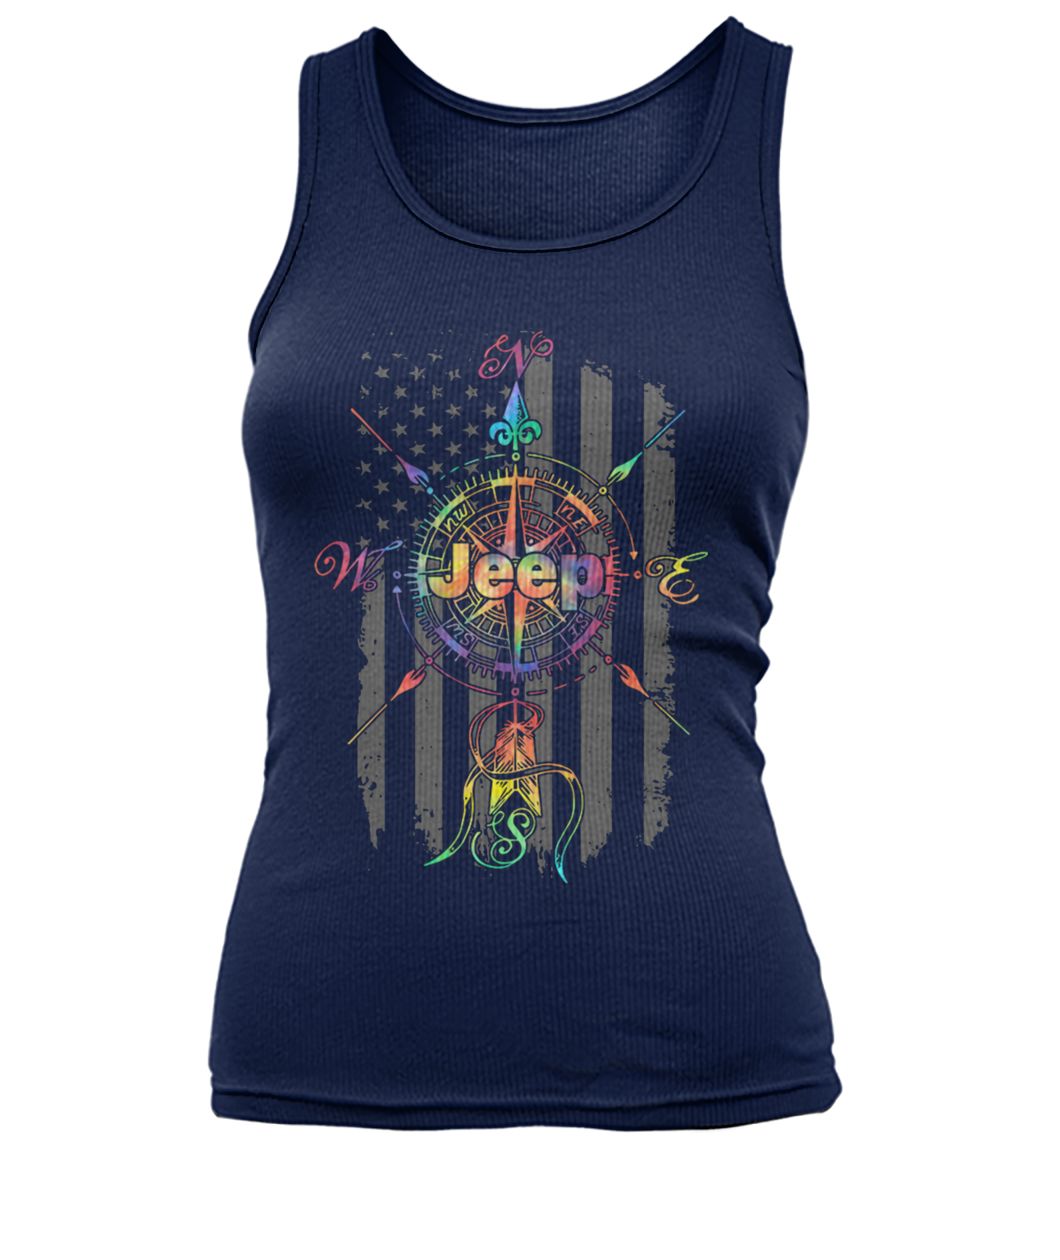 Jeep compass america flag 4th of july women's tank top